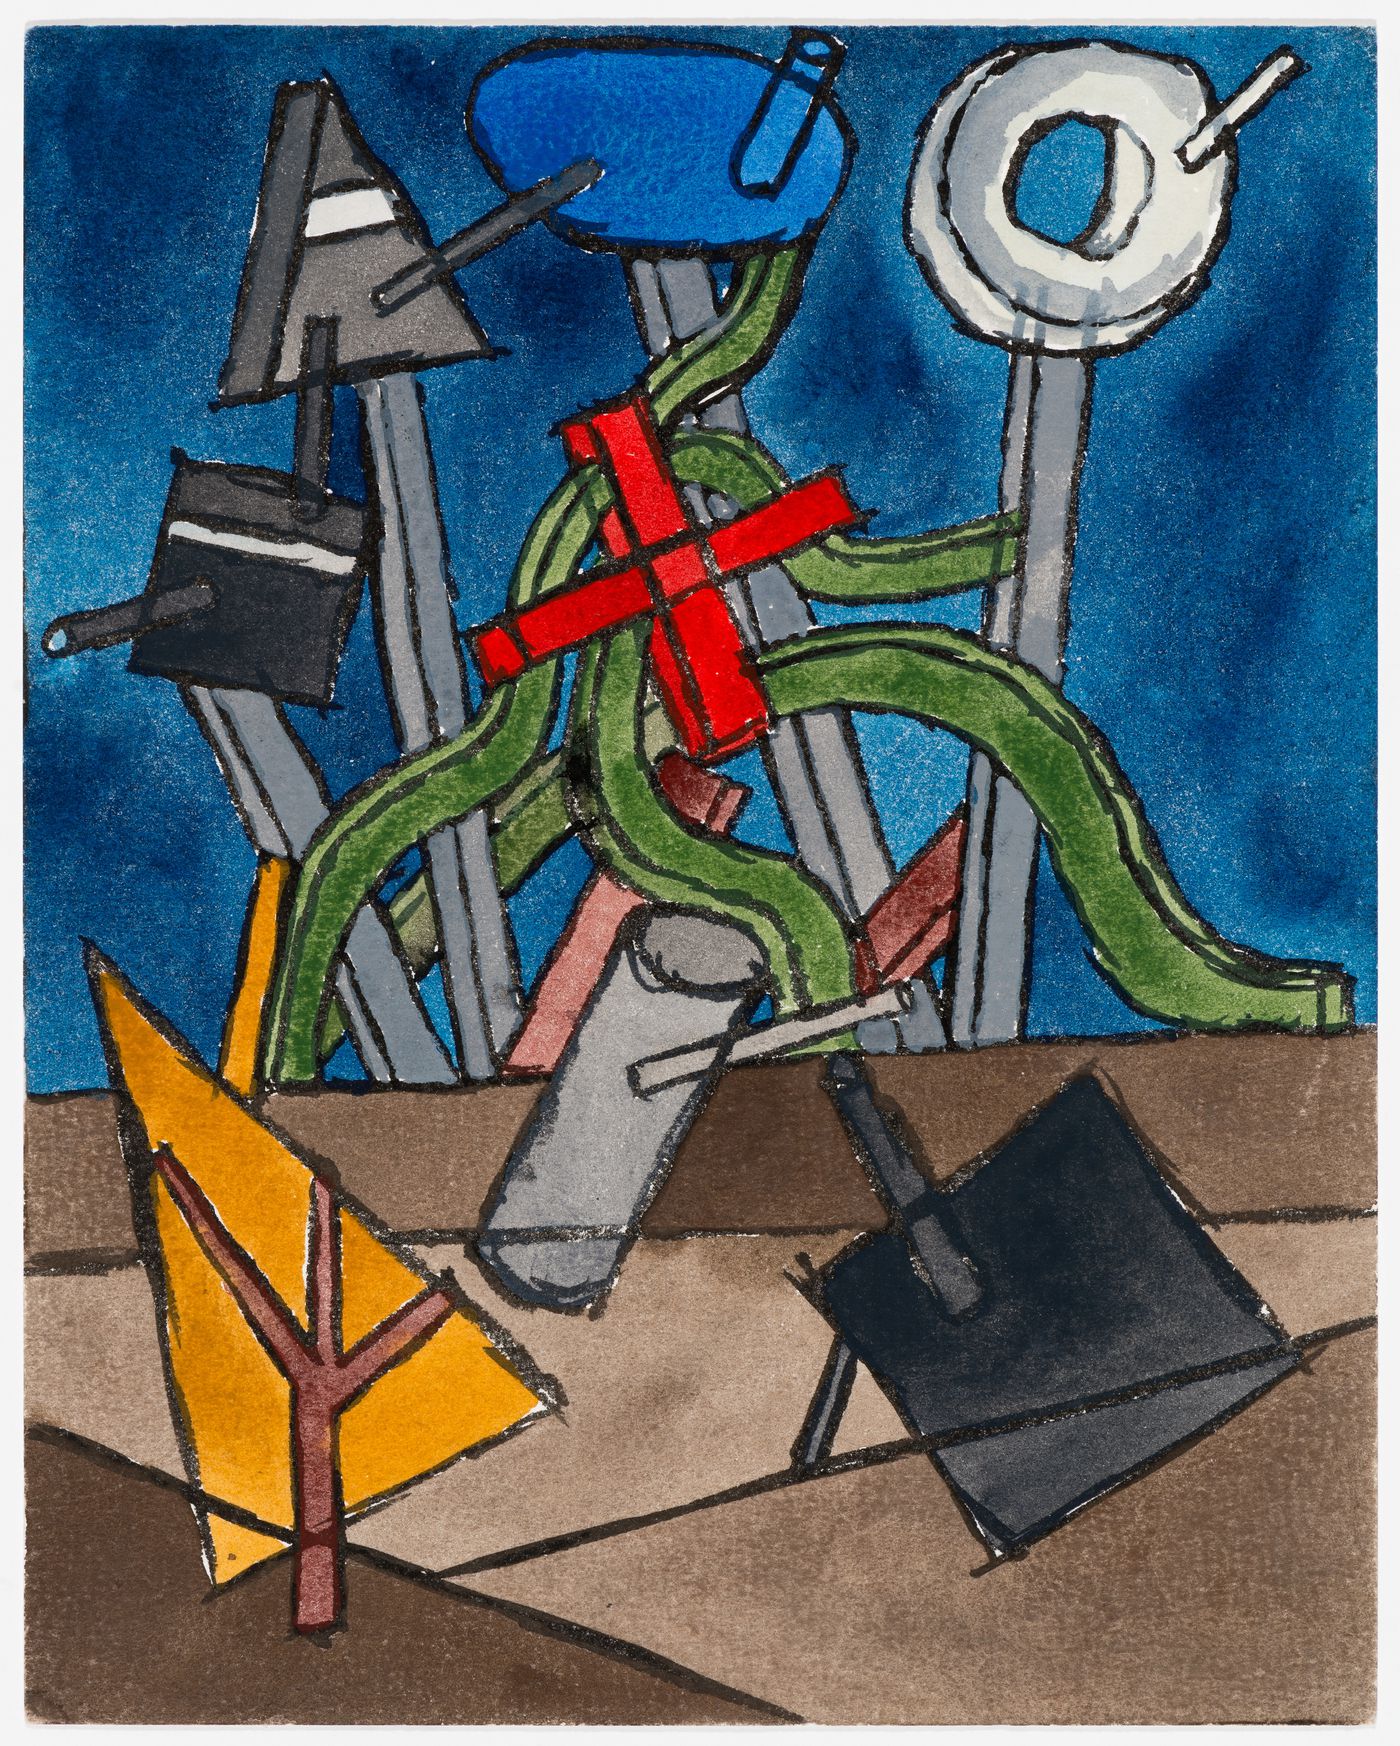 Painting for Berlin Night depicting structures for Braque, Gris, Beckmann and Leger